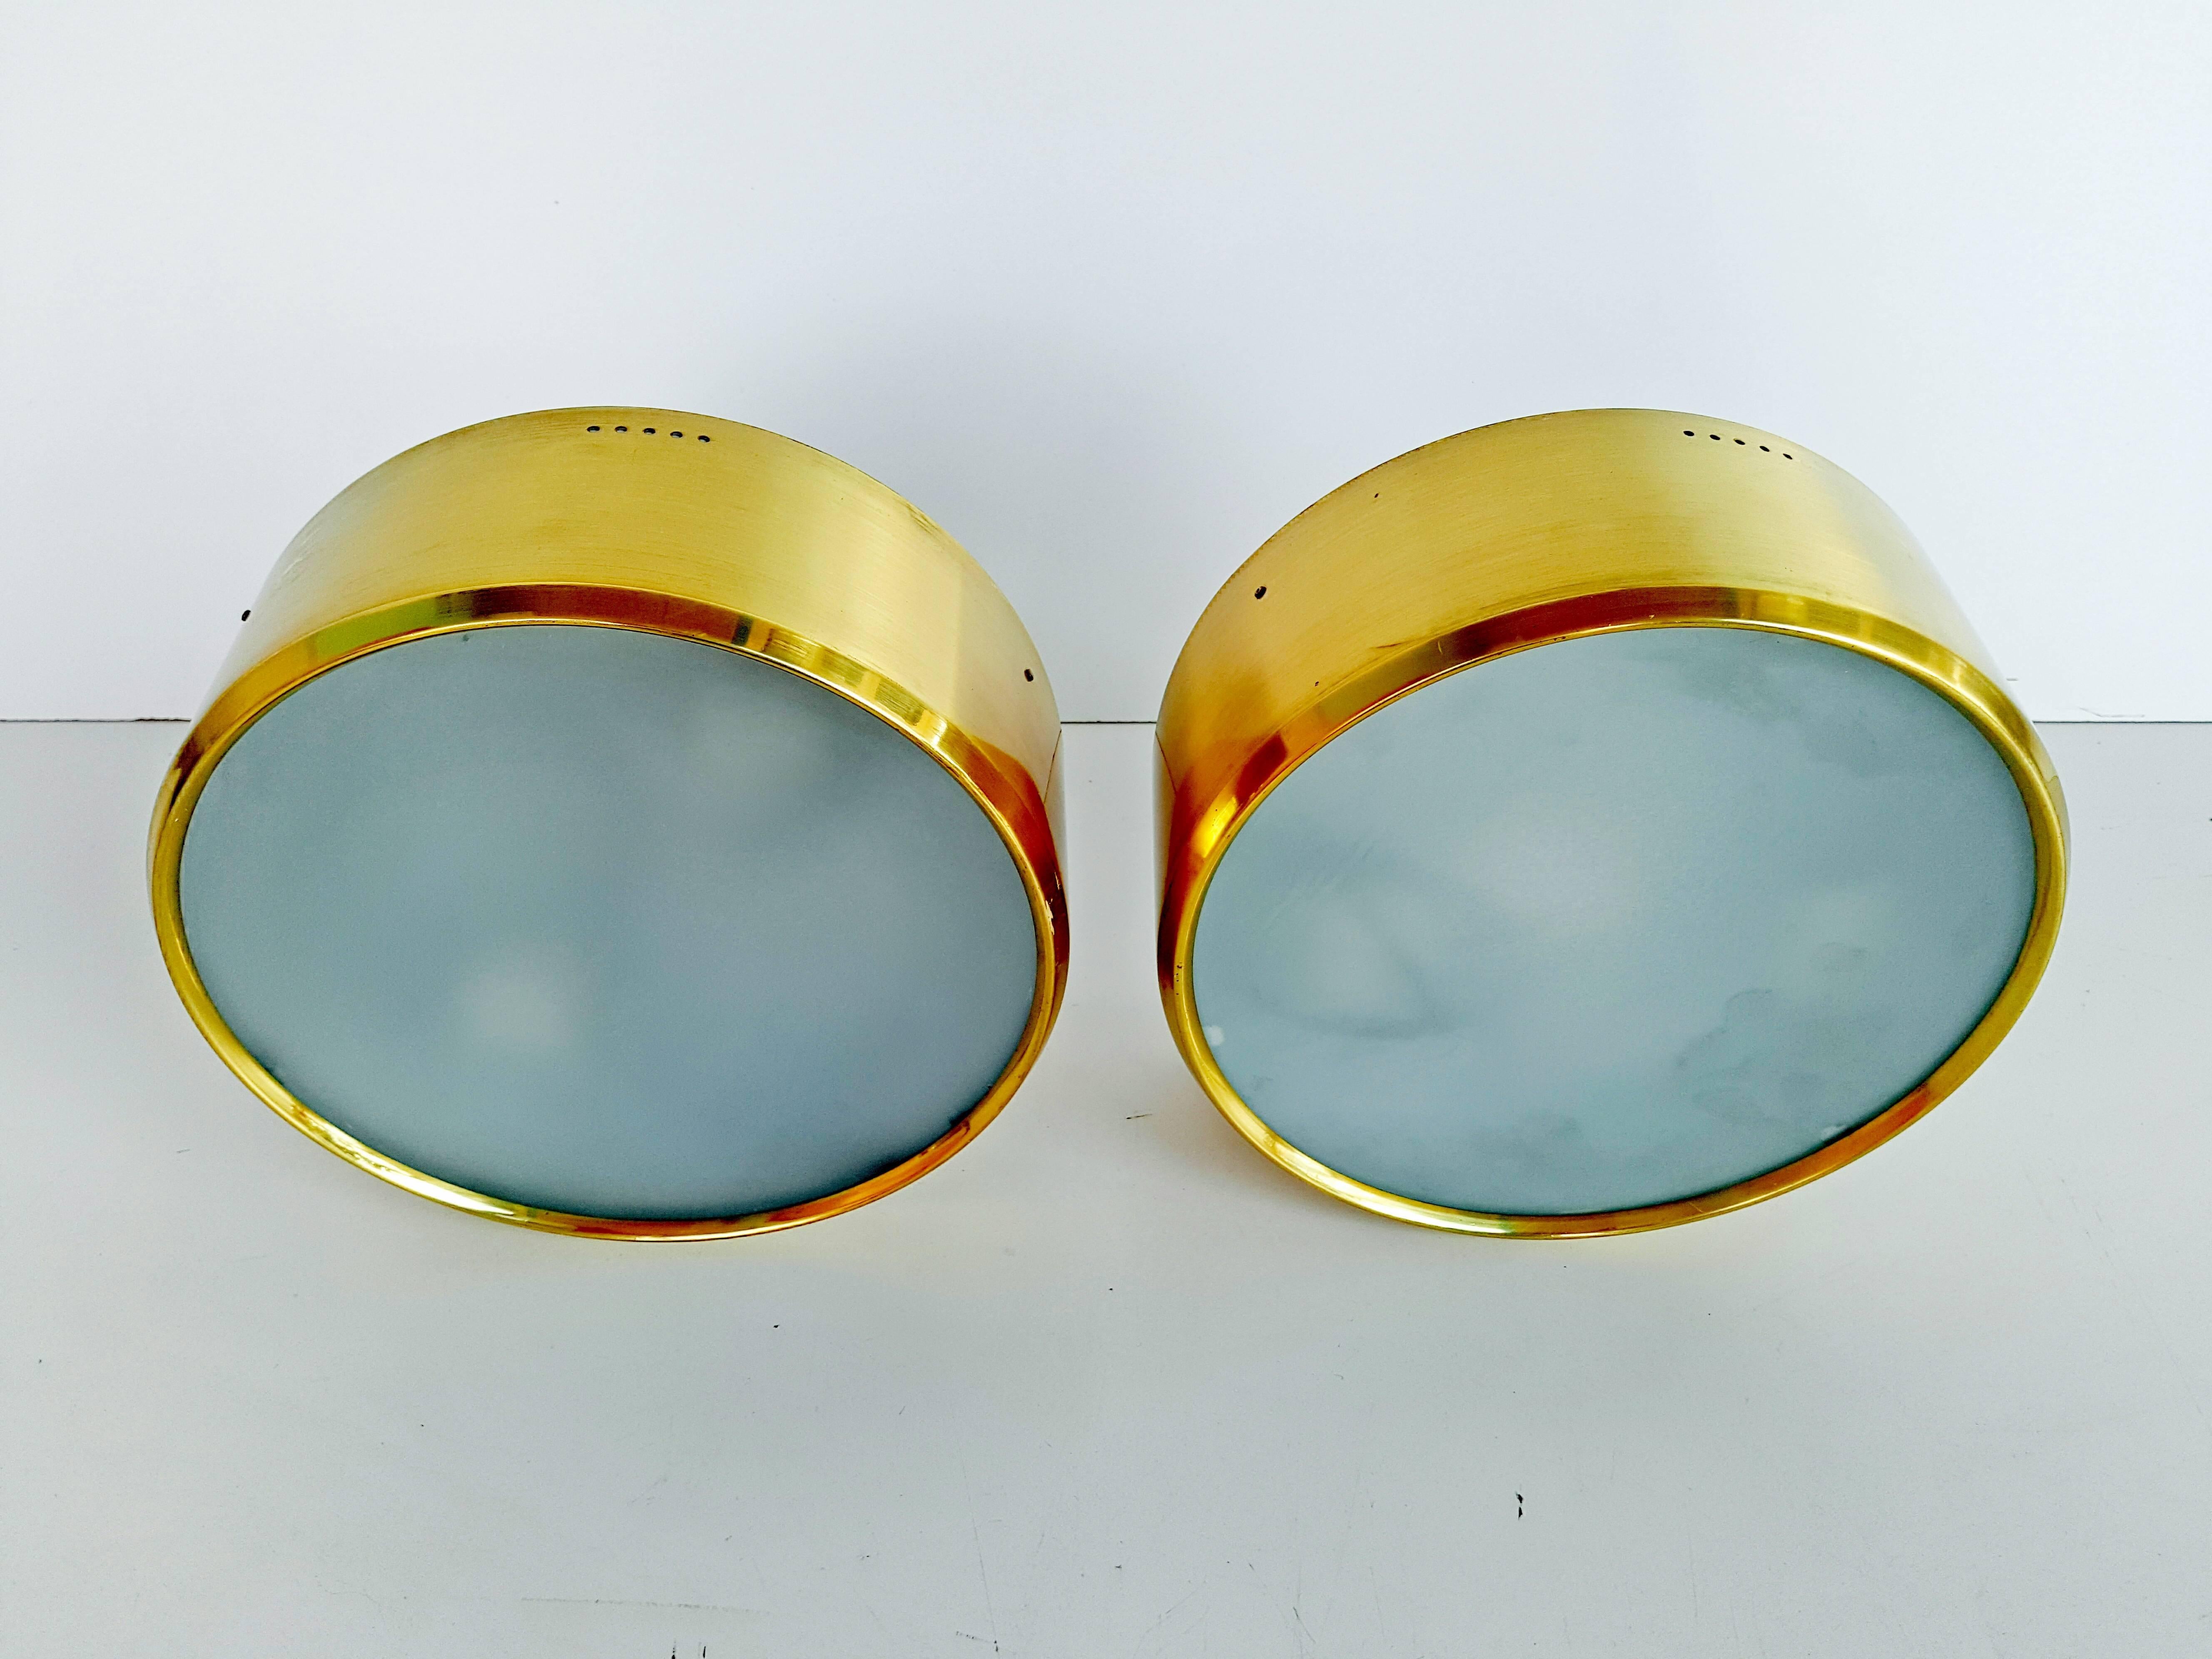 Rare Pair of Brass and Glass Ceiling/Wall Lights by Stilnovo, 1960s For Sale 5